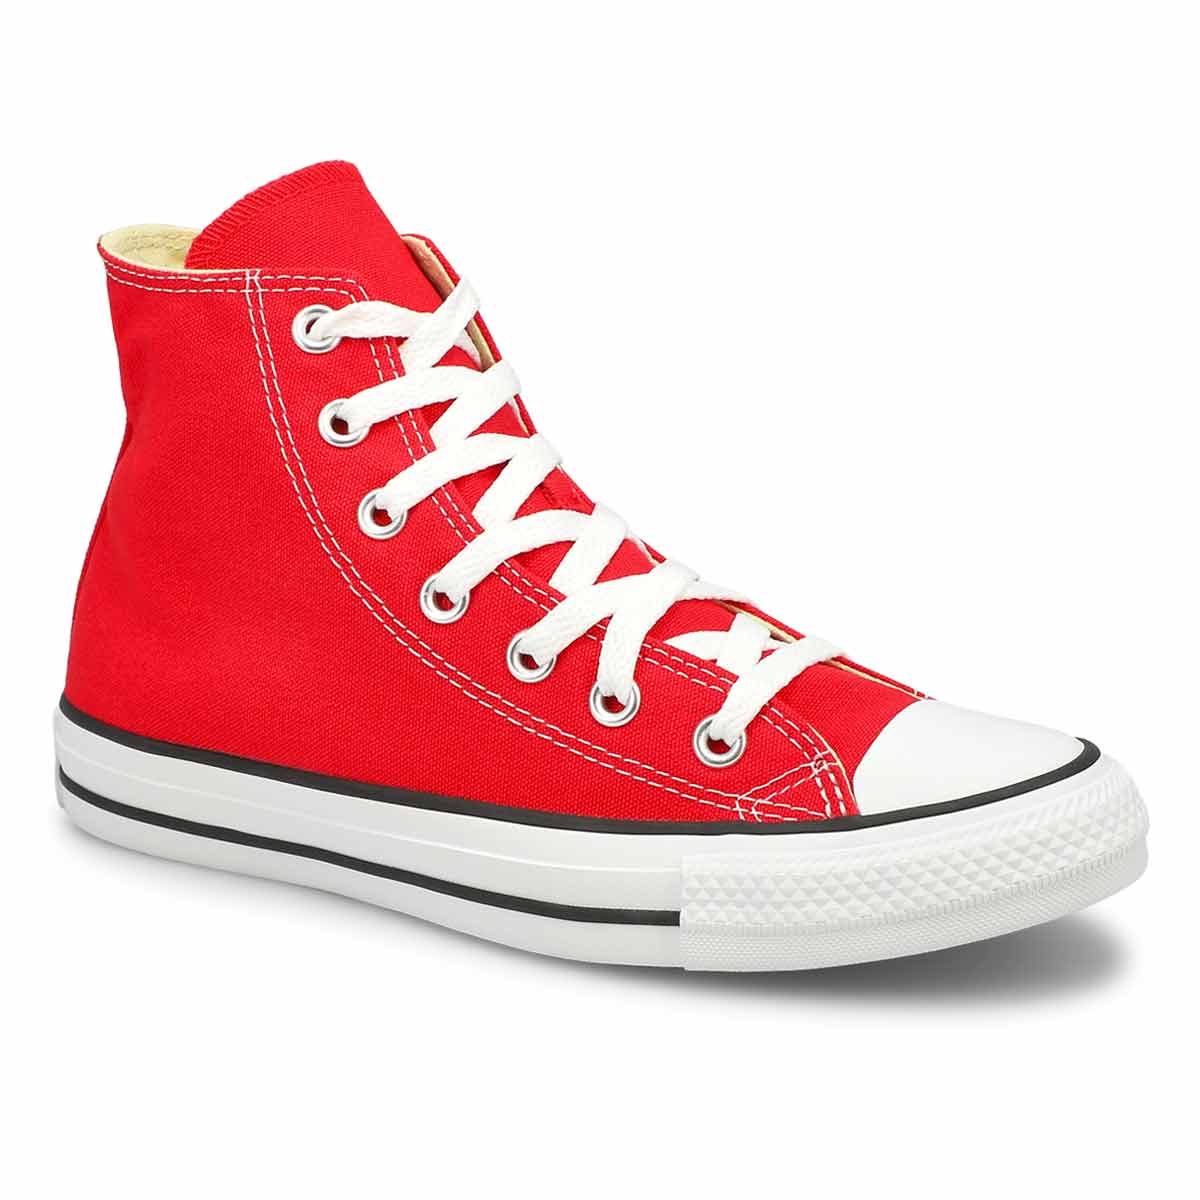 red high top converse womens